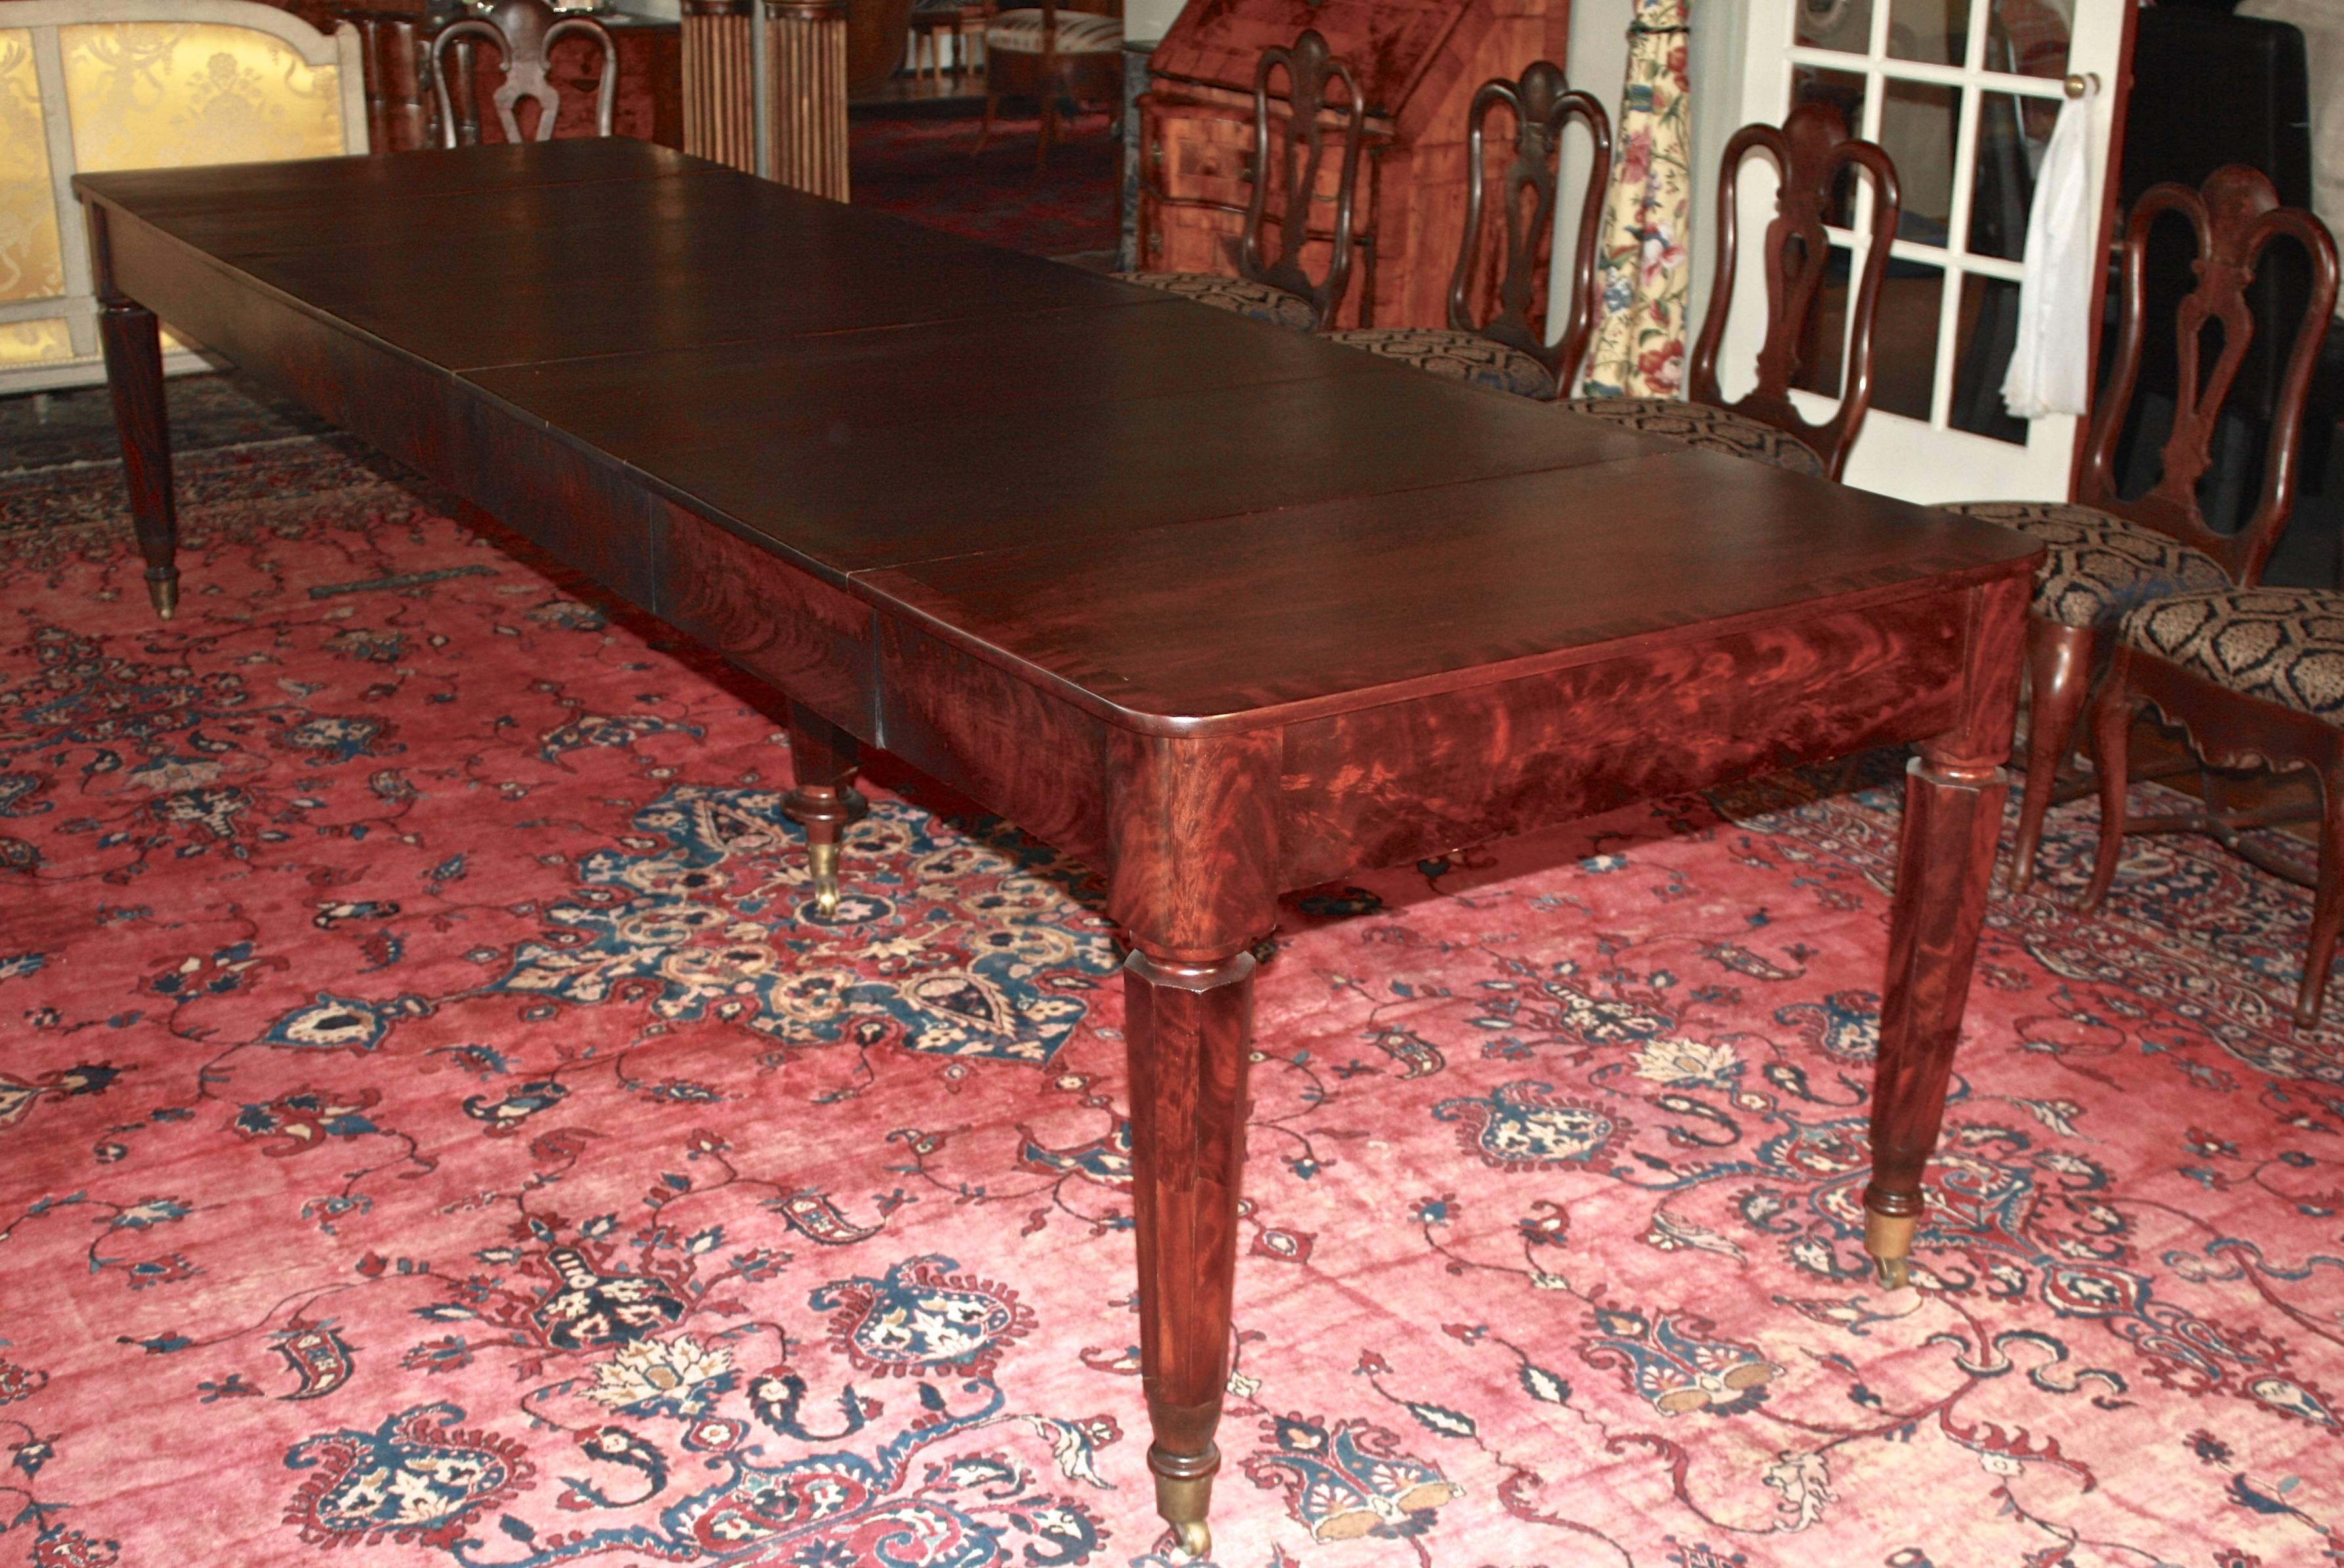 A 'bespoke' American banquet table from one of the Middle Atlantic states leading makers. A tour de force display of strikingly grained Honduran mahogany and walnut solids, veneers and contrasting bands; with beech as a secondary wood. Fully